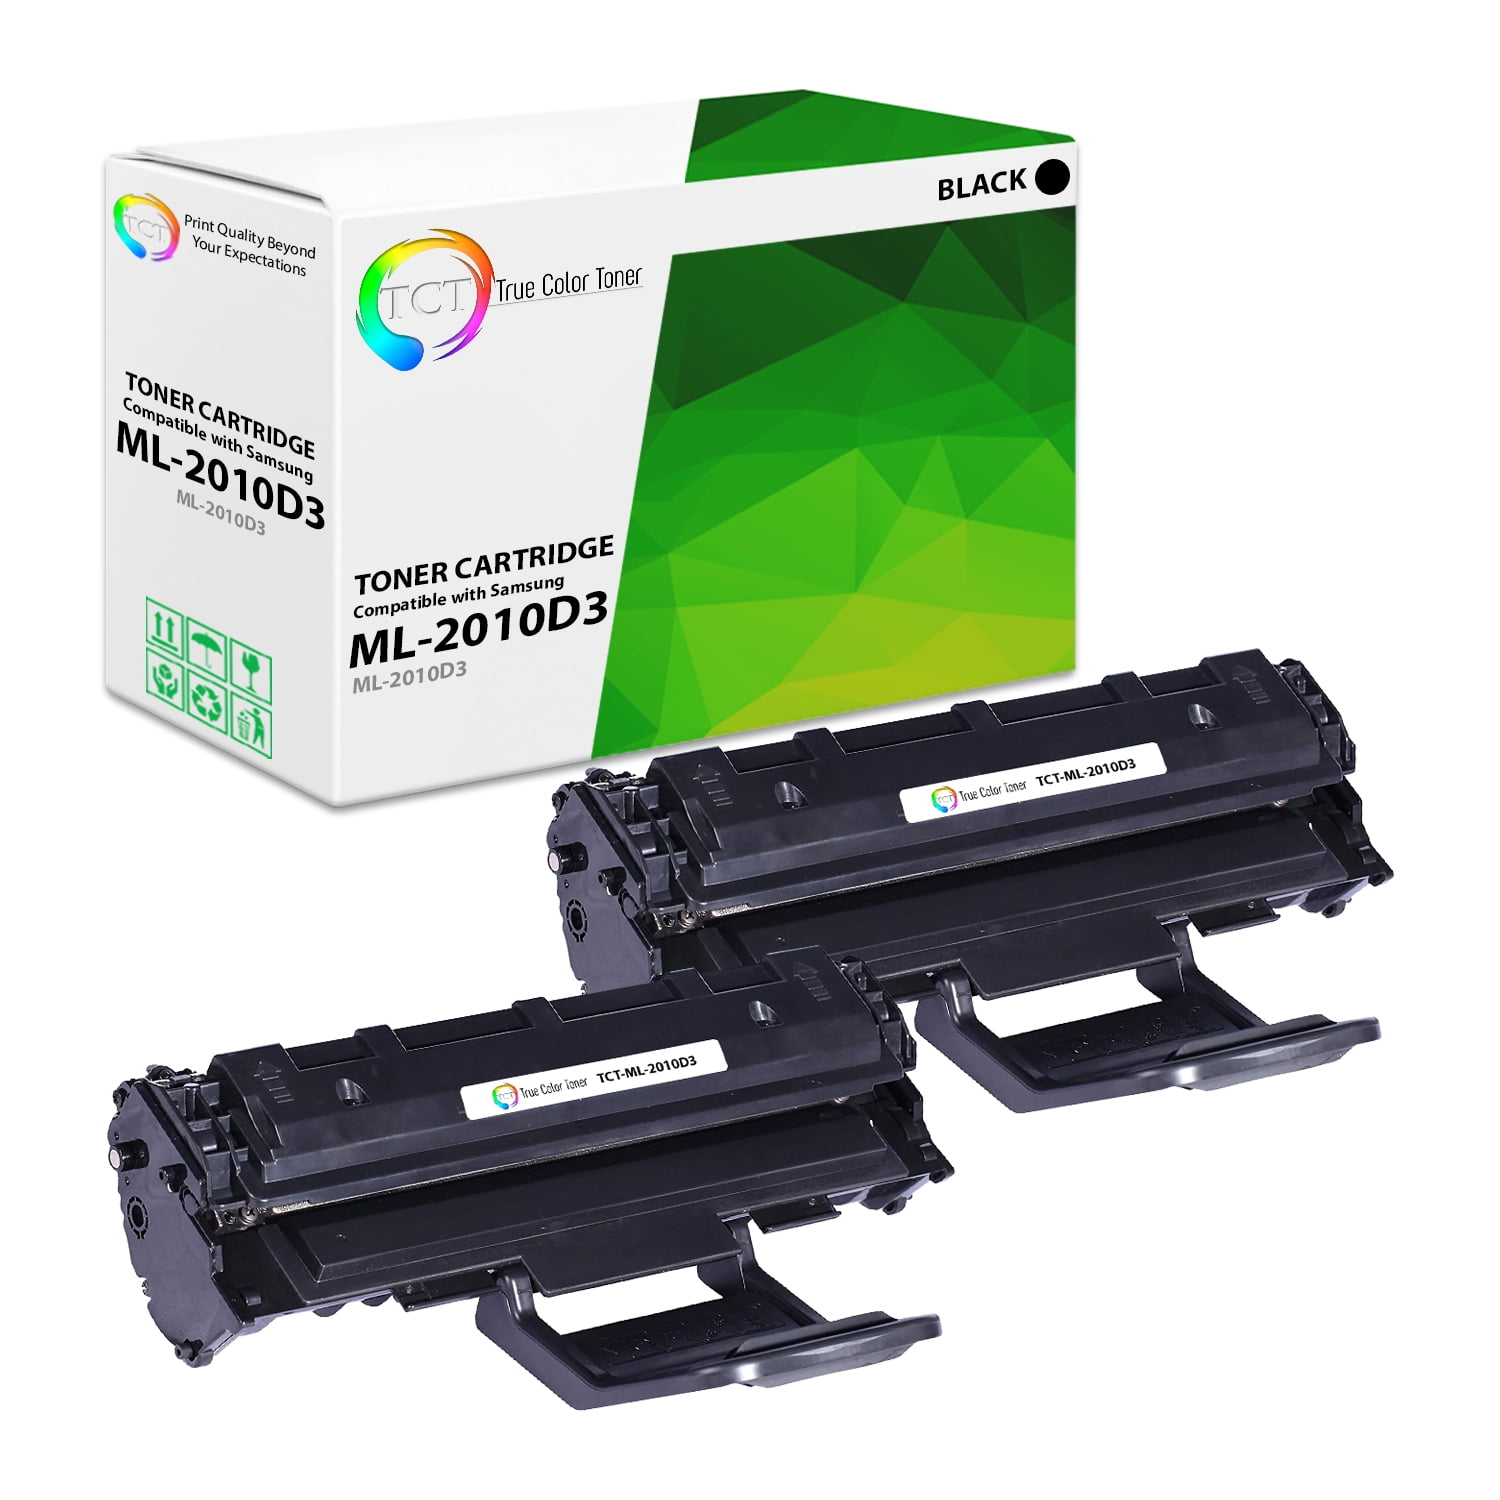 capaciteit Purper Goed opgeleid TCT Premium Compatible Toner Cartridge Replacement for Samsung ML-2010D3  Black works with Samsung ML-2010 ML-2510 ML-2570 ML-2571N, SCX-4521F  SCX-4521FG Printers (3,000 Pages) - 2 Pack - Walmart.com